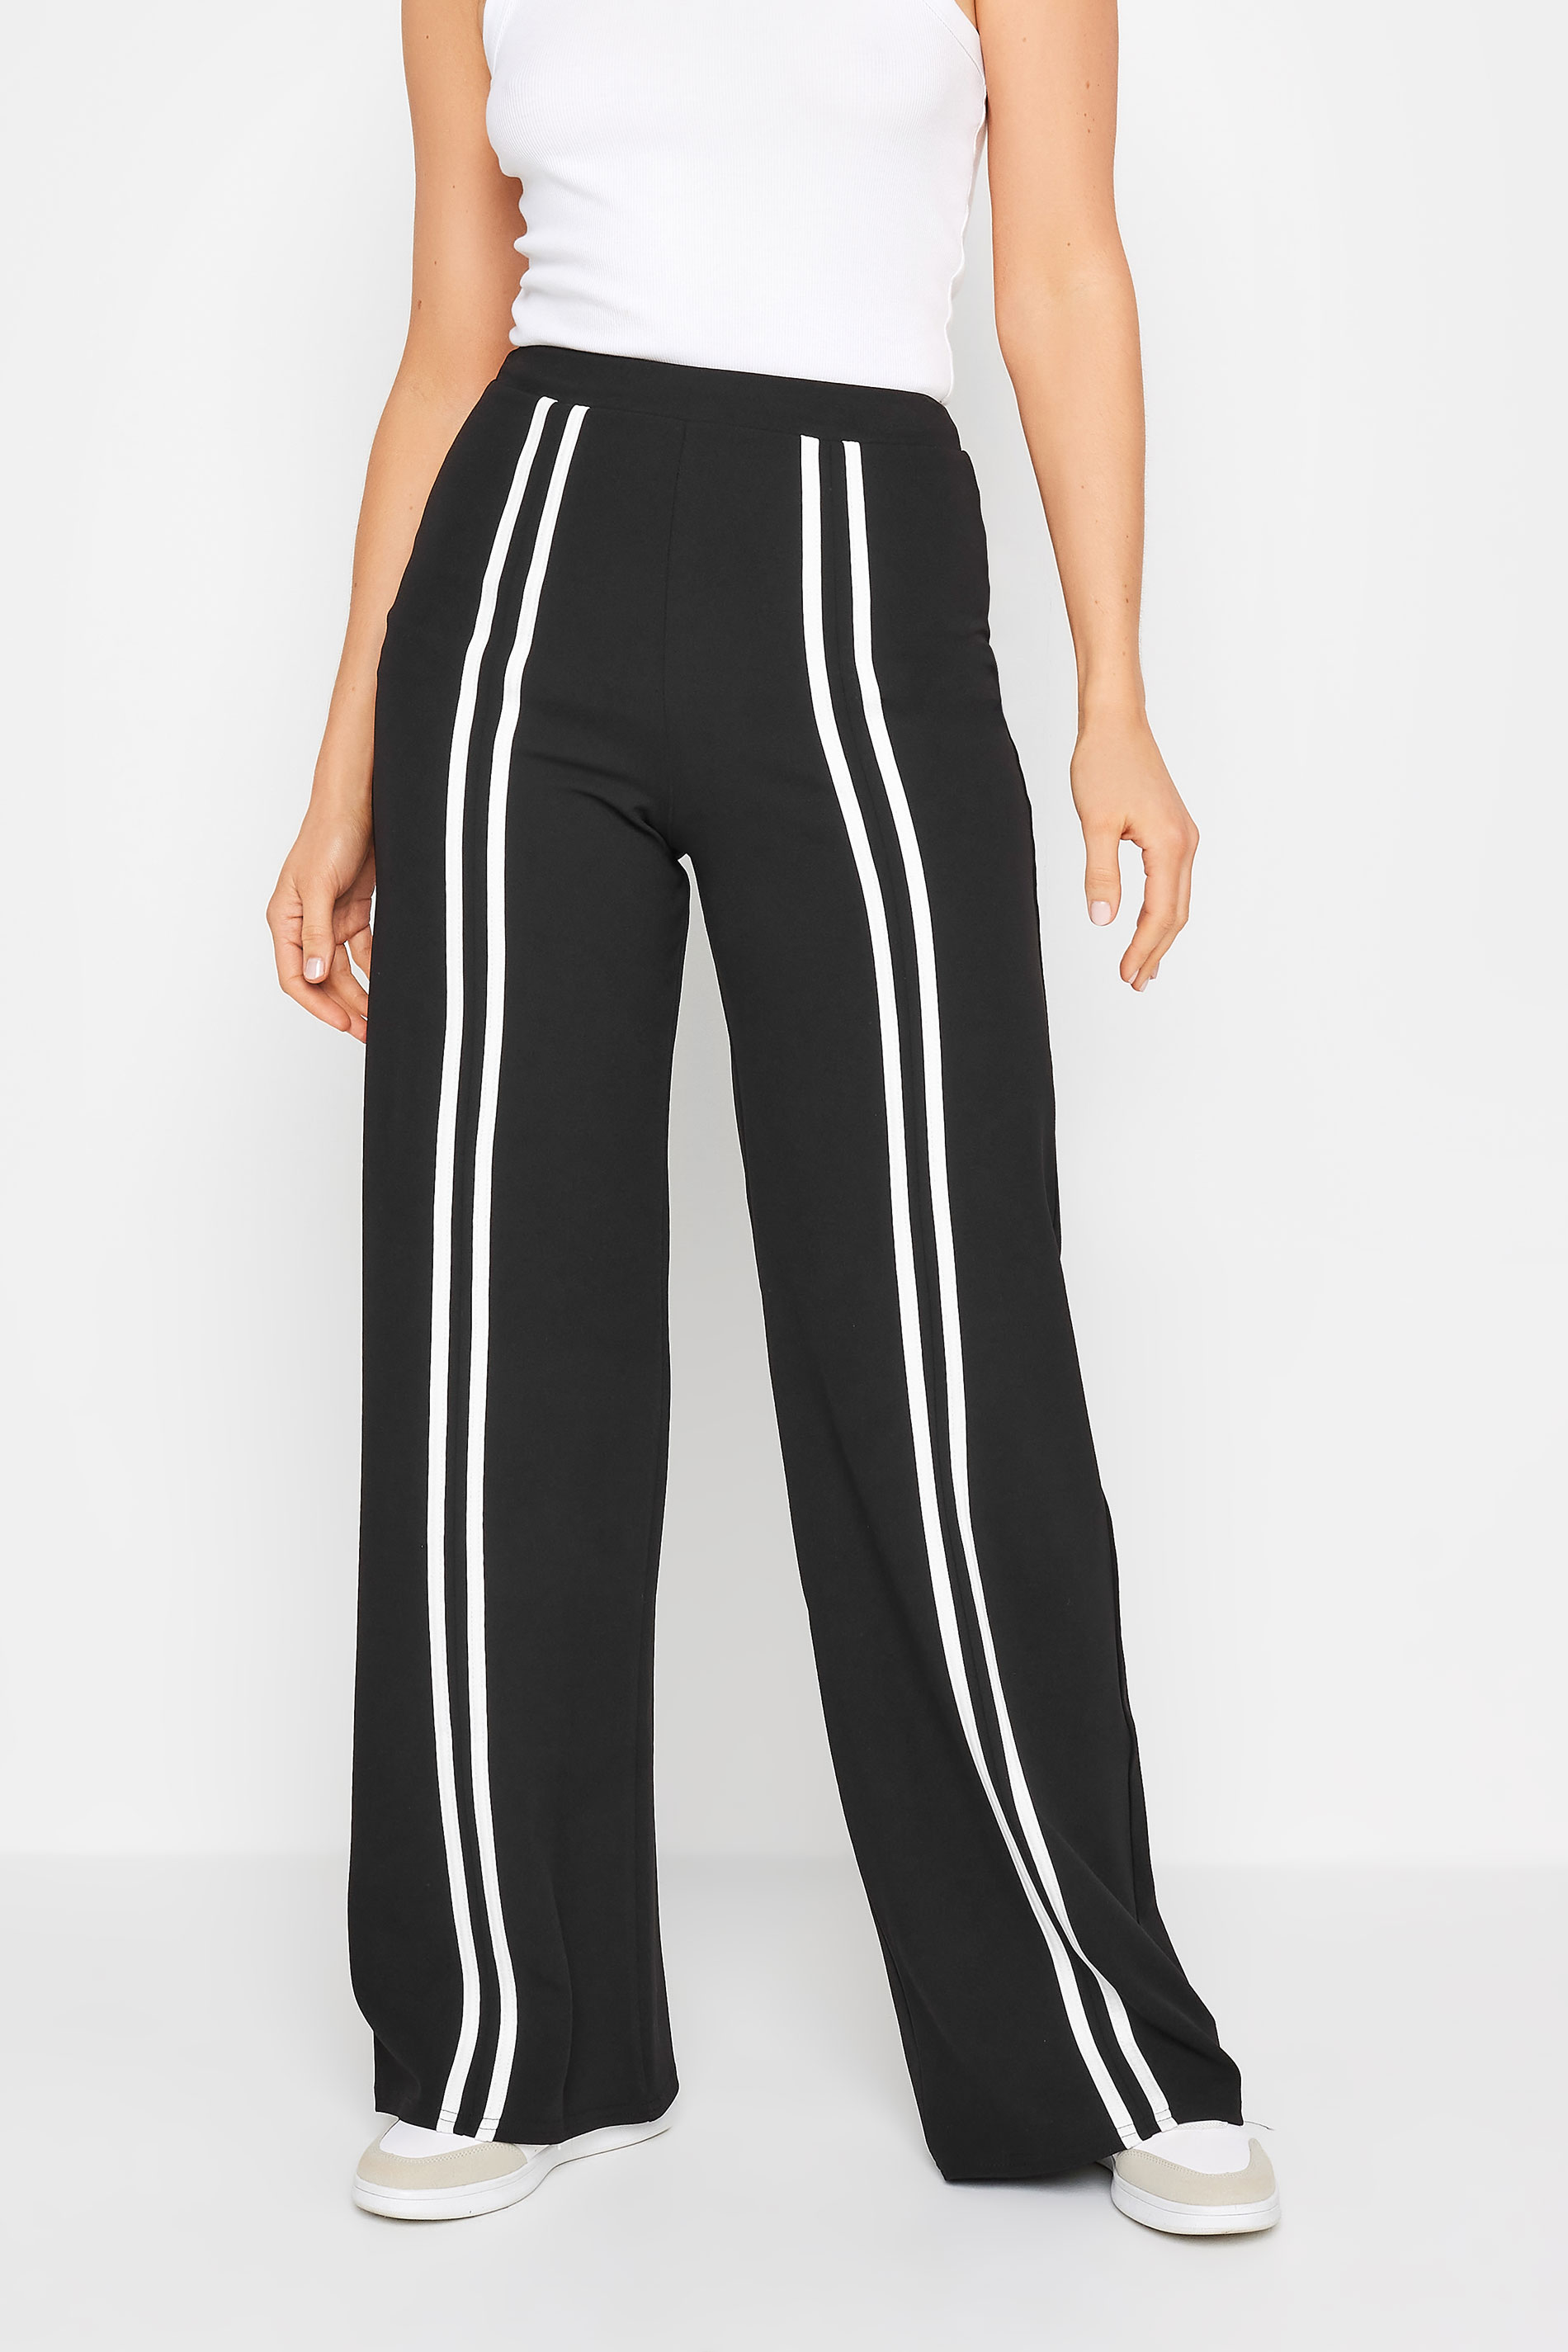 LTS Tall Womens Black & White Front Stripe Wide Leg Trousers | Long Tall Sally 2